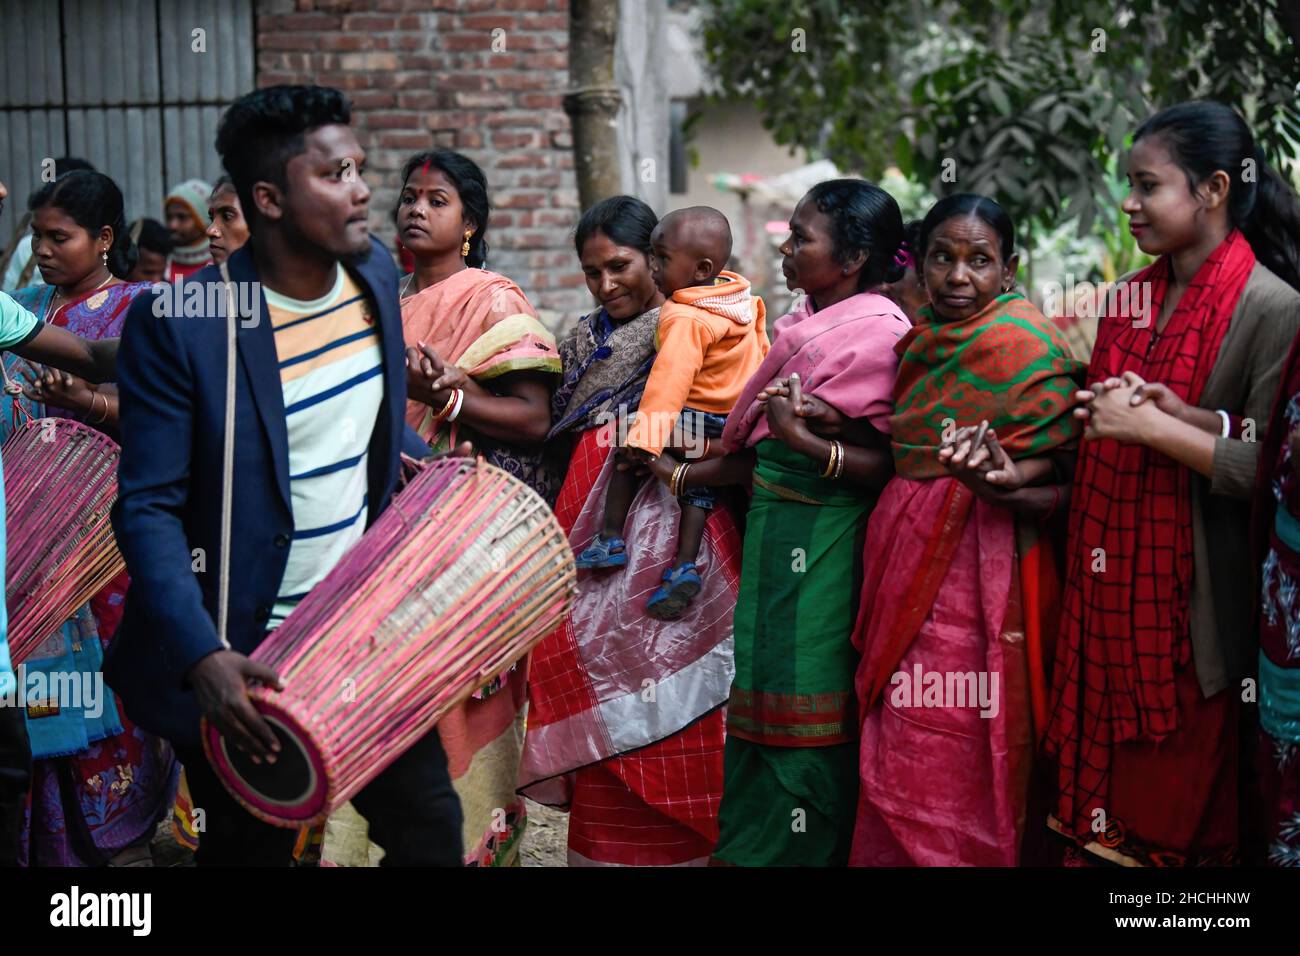 Rajshahi, Bangladesh. 28th Dec, 2021. Santali people seen performing the traditional group dance at a wedding in Rajshahi. Santal tribe is an ethnic group native to eastern India. Santals are the largest tribe in the Jharkhand state of India in terms of population and are also found in the states of Assam, Tripura, Bihar, Odisha and West Bengal. They are the largest ethnic minority in northern Bangladesh's Rajshahi Division and Rangpur Division. (Photo by Piyas Biswas/SOPA Images/Sipa USA) Credit: Sipa USA/Alamy Live News Stock Photo